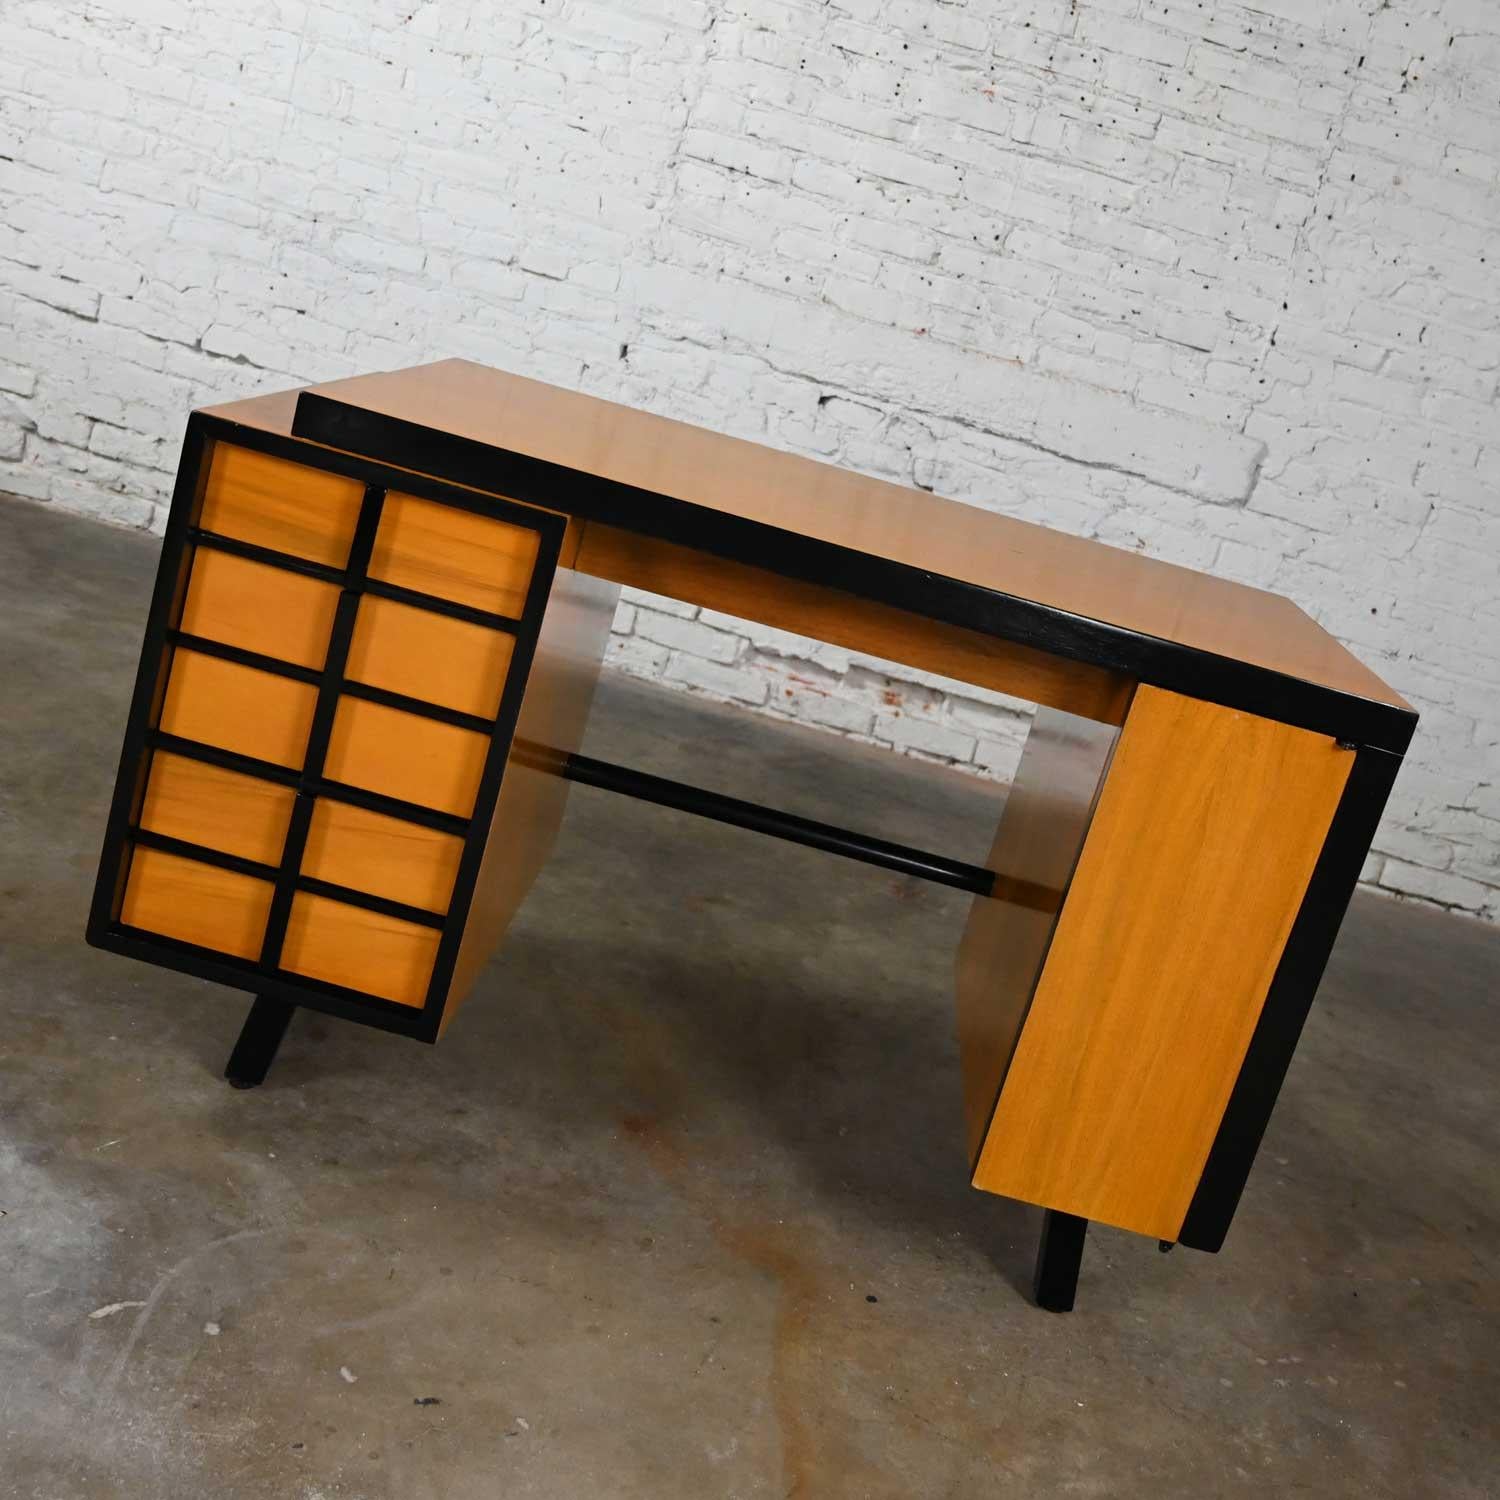 Stunning vintage mid-century modern or Art Deco with an Asian flair maple colored exotic wood desk by American of Martinsville. Beautiful condition, keeping in mind that this is vintage and not new so will have signs of use and wear. We have